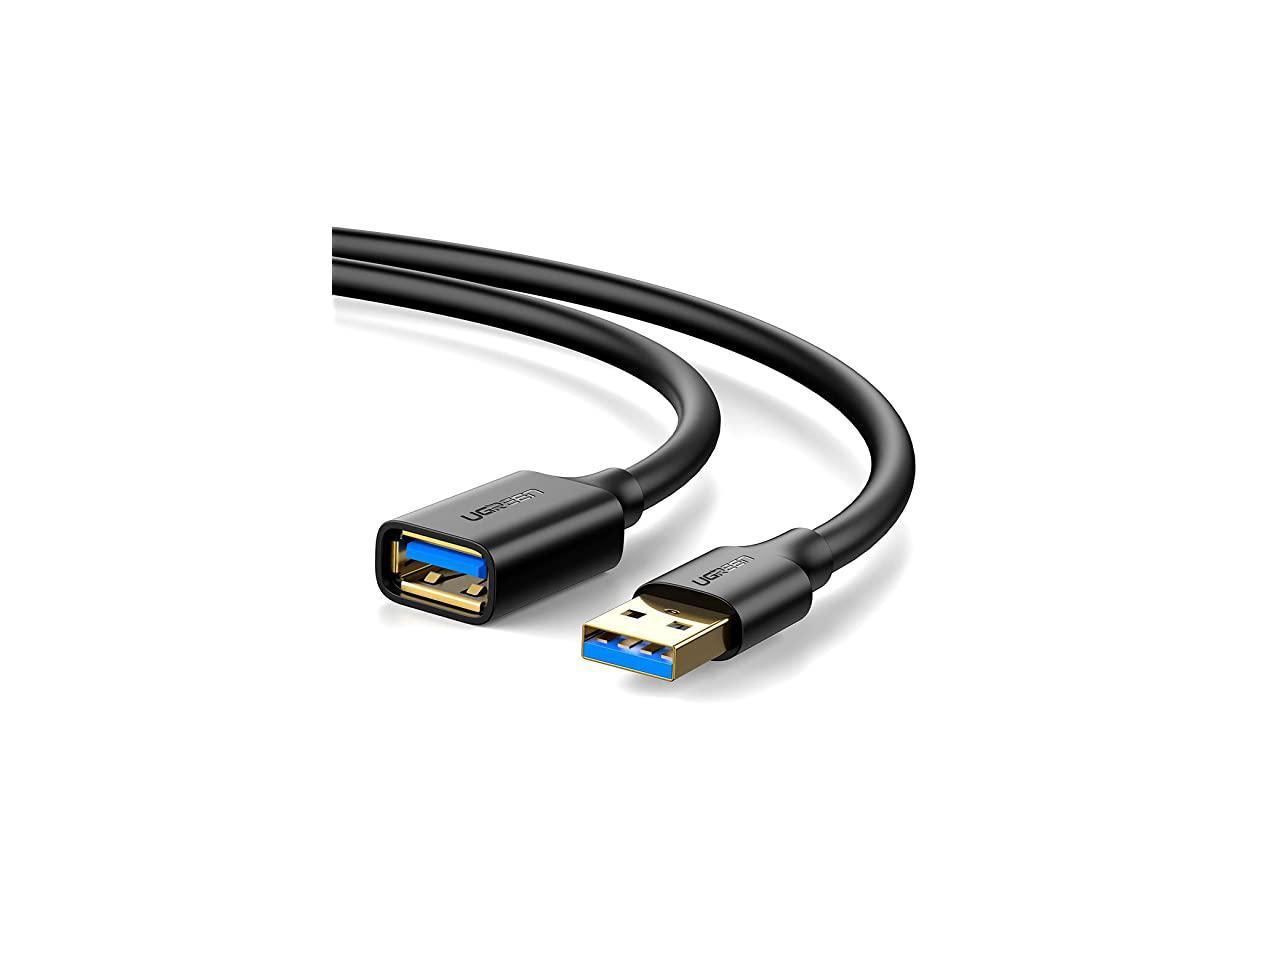 USB3.0 Extension Cable 15ft SNANSHI USB 3.0 Extender Cord Type A Male to Female Extension Cable Compatible for USB Flash Drive Hard Drive,Keyboard Camera Xbox Oculus VR Printer Card Reader 